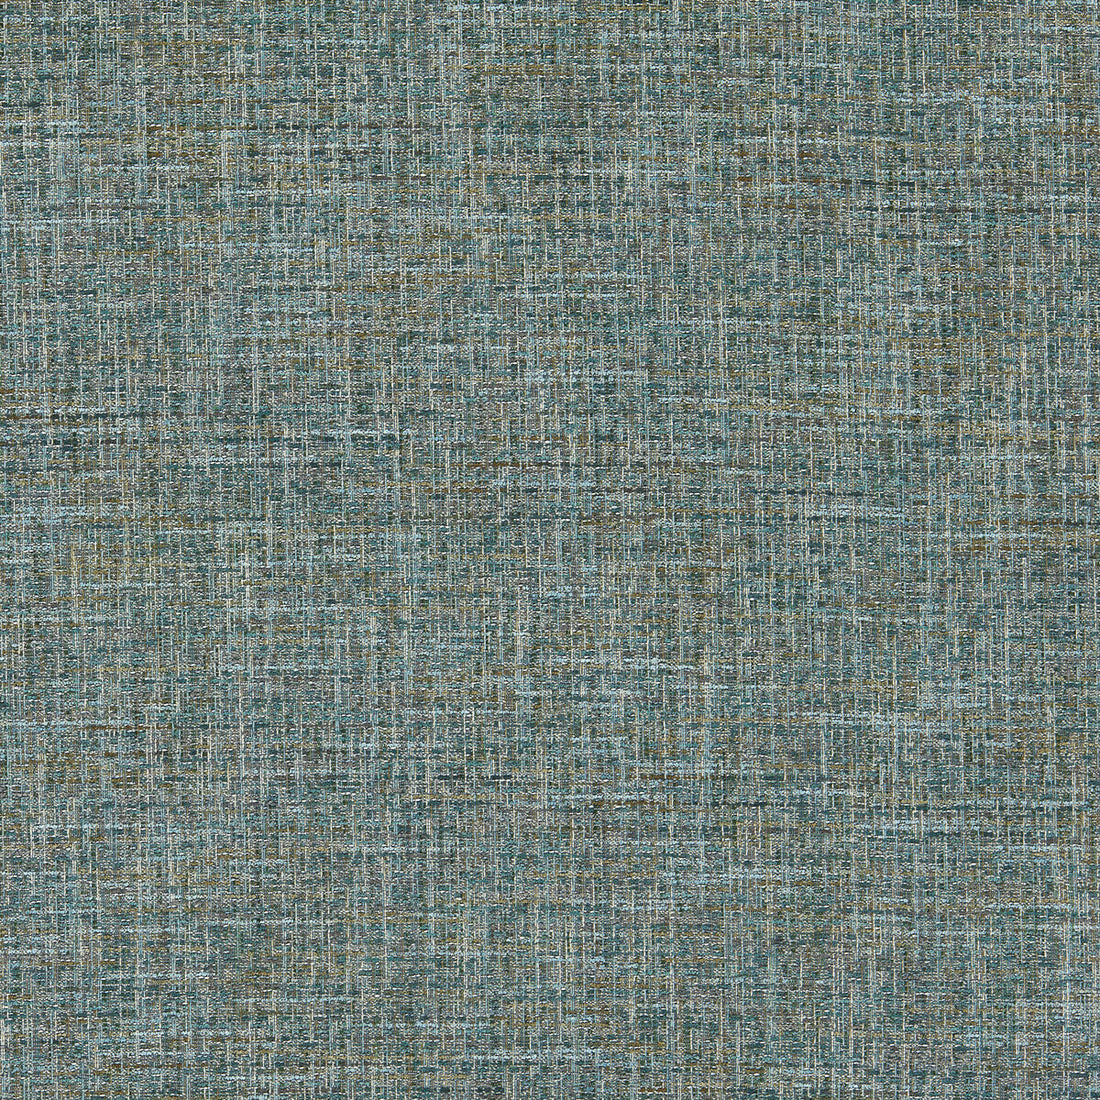 Cetara fabric in kingfisher color - pattern F1642/10.CAC.0 - by Clarke And Clarke in the Cetara collection